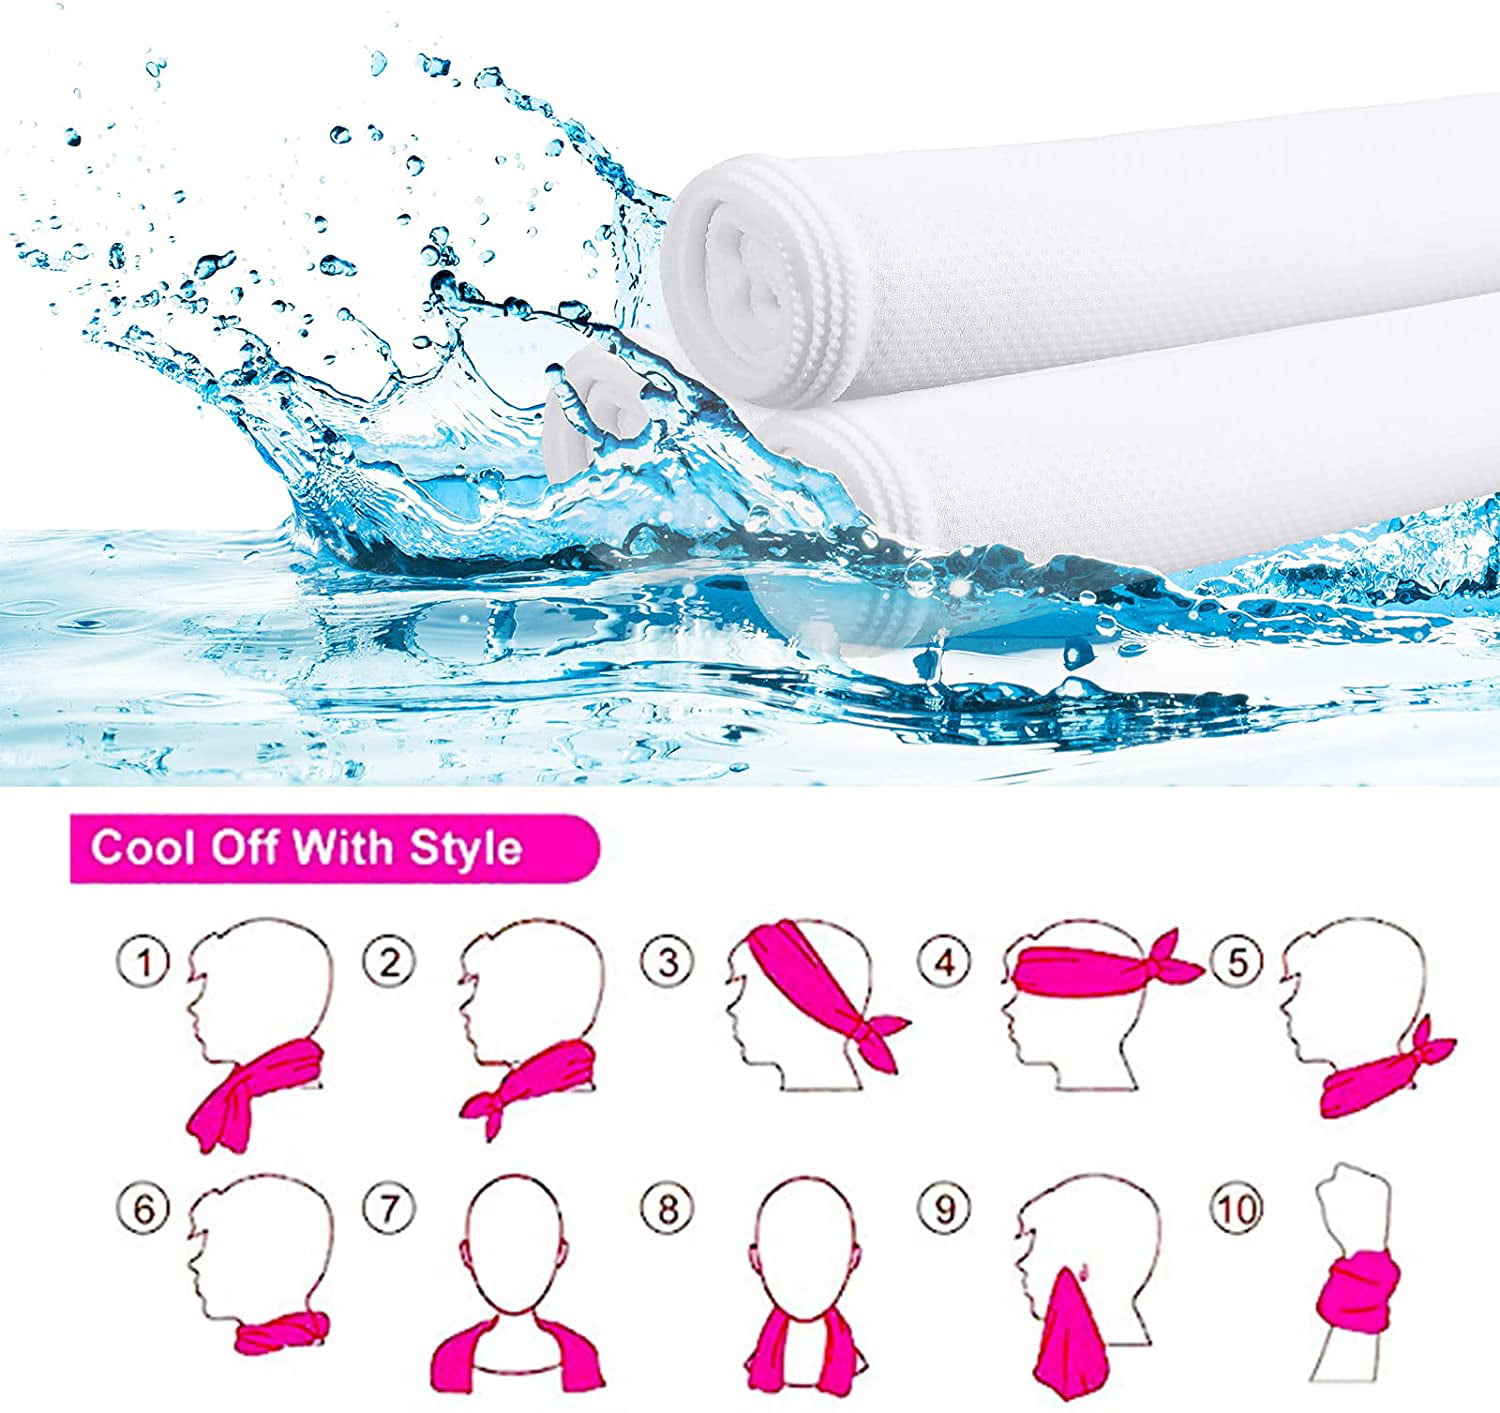 Riding Workout and Many Activities Golf Running Sublimation Blanks Towel Cooling Towel 40 x 12 Inch White Ice Towel Microfiber Towel Soft Breathable Chilly Towel for Yoga 6 Pieces Gym